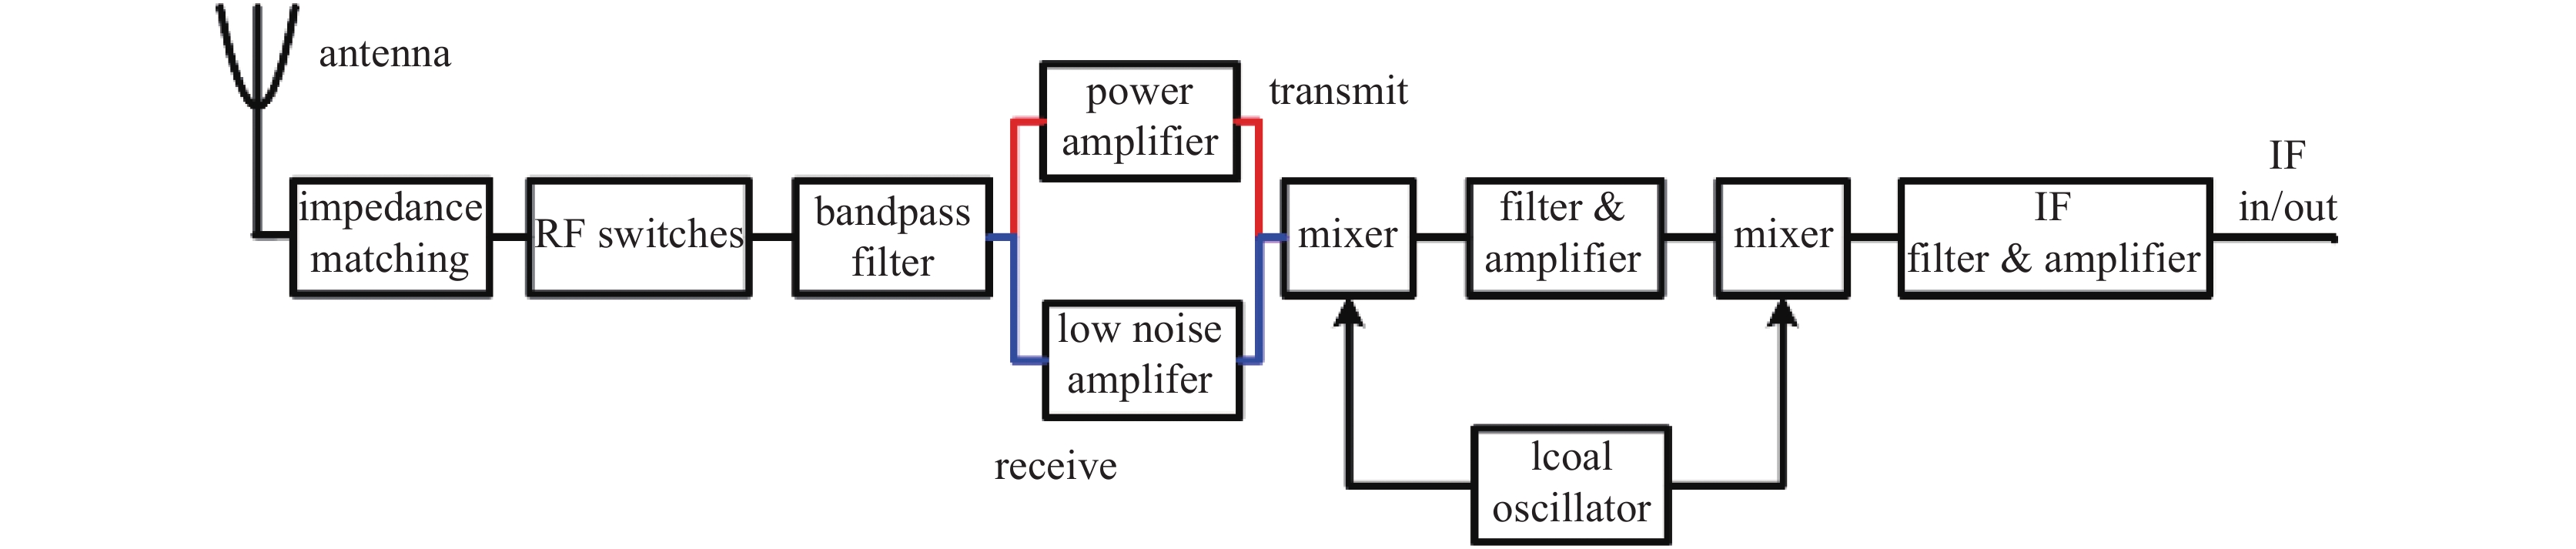 Typical transceiver structure for RF front end